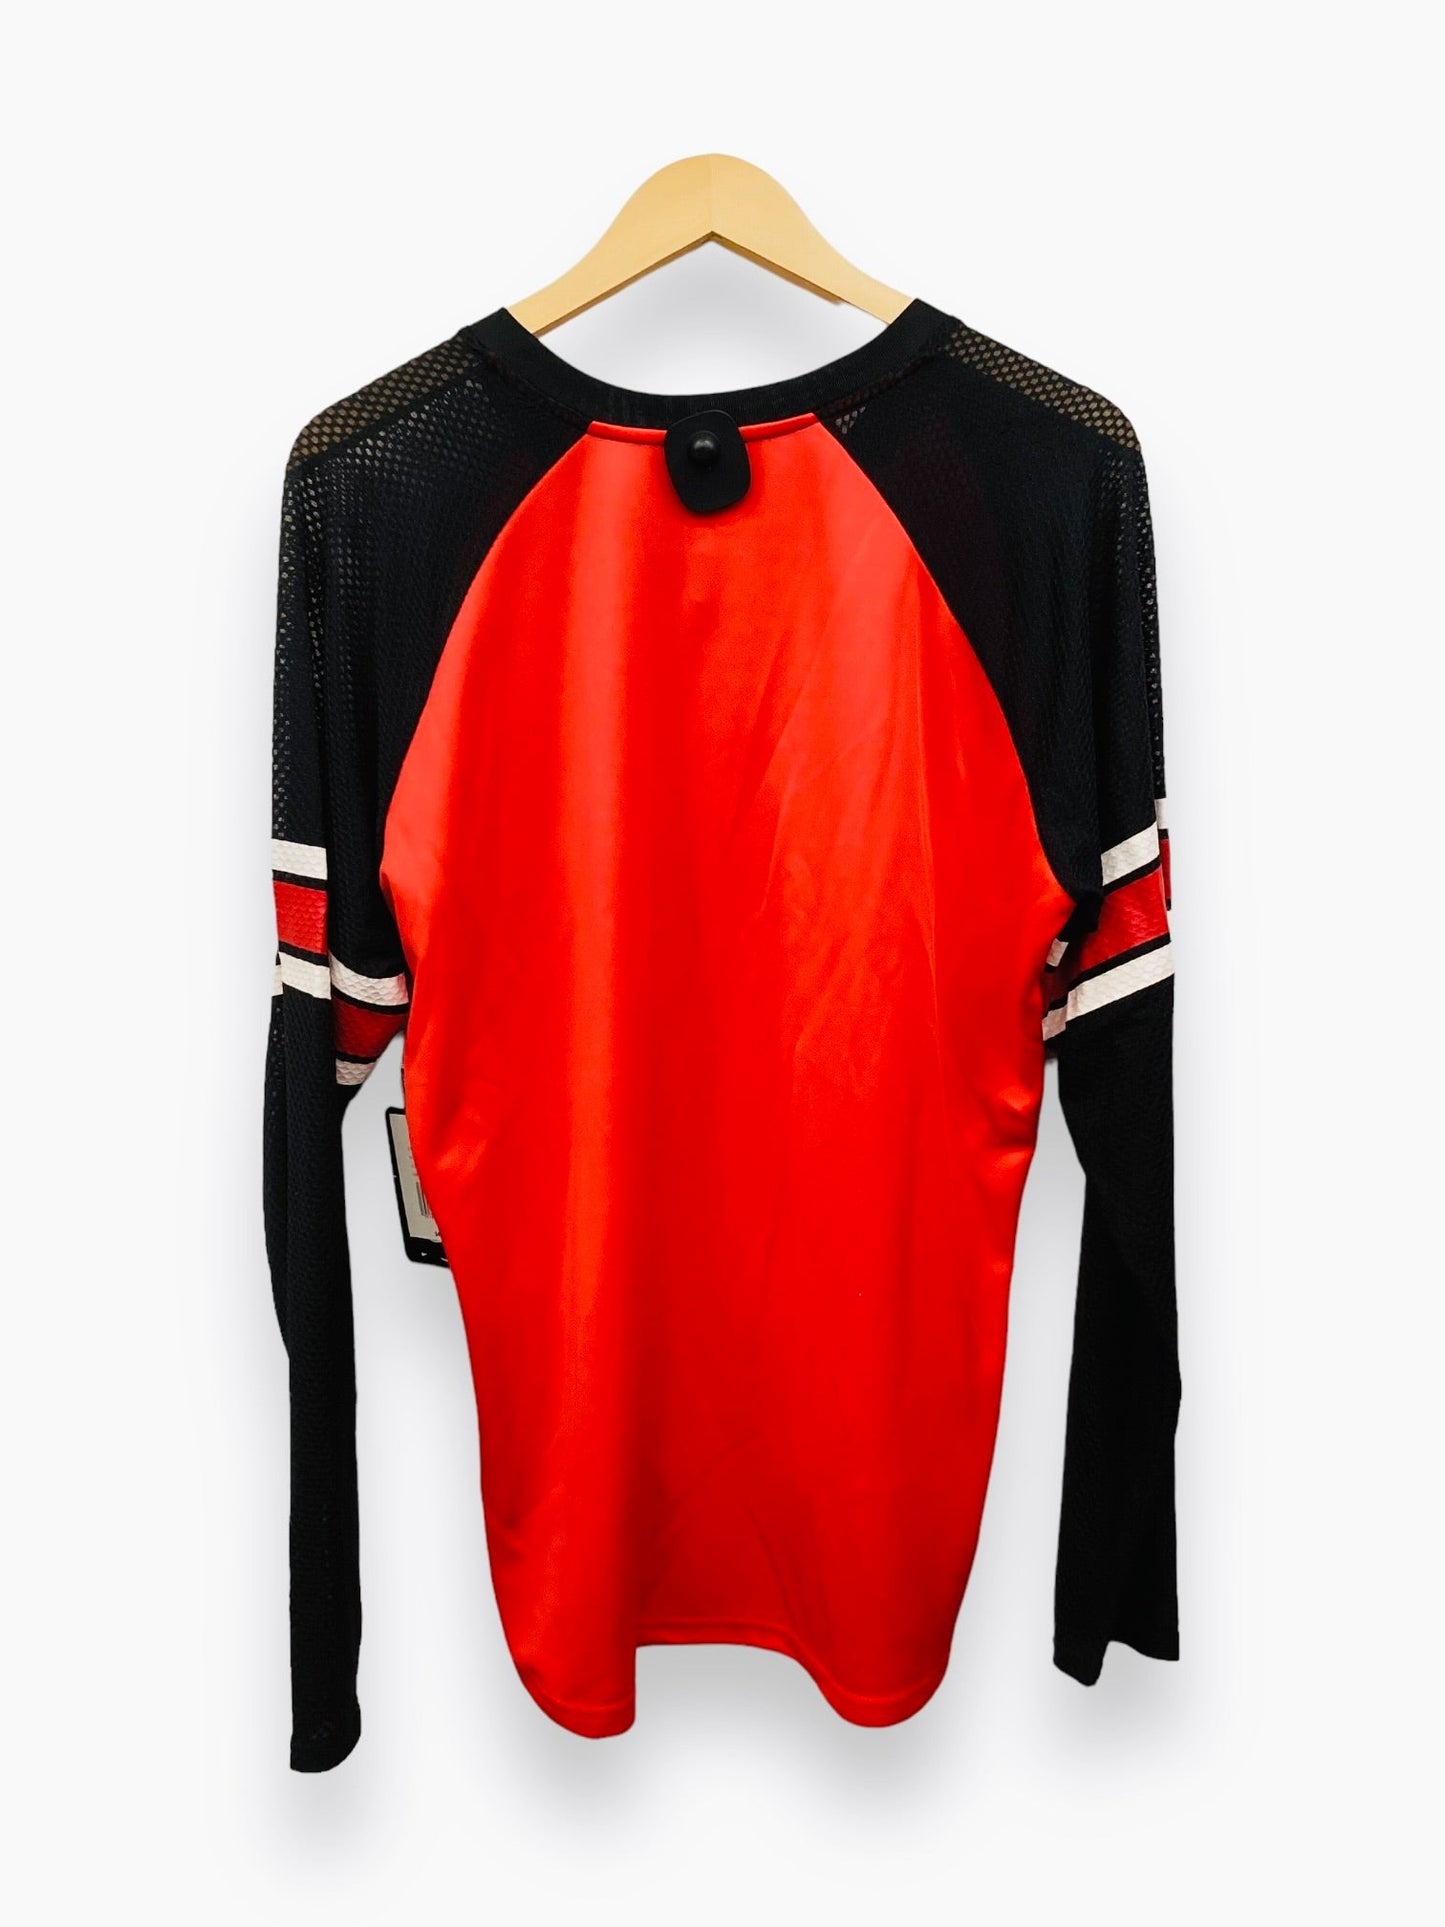 NWT Red Athletic Top Long Sleeve Crewneck Nhl, Size Xxl